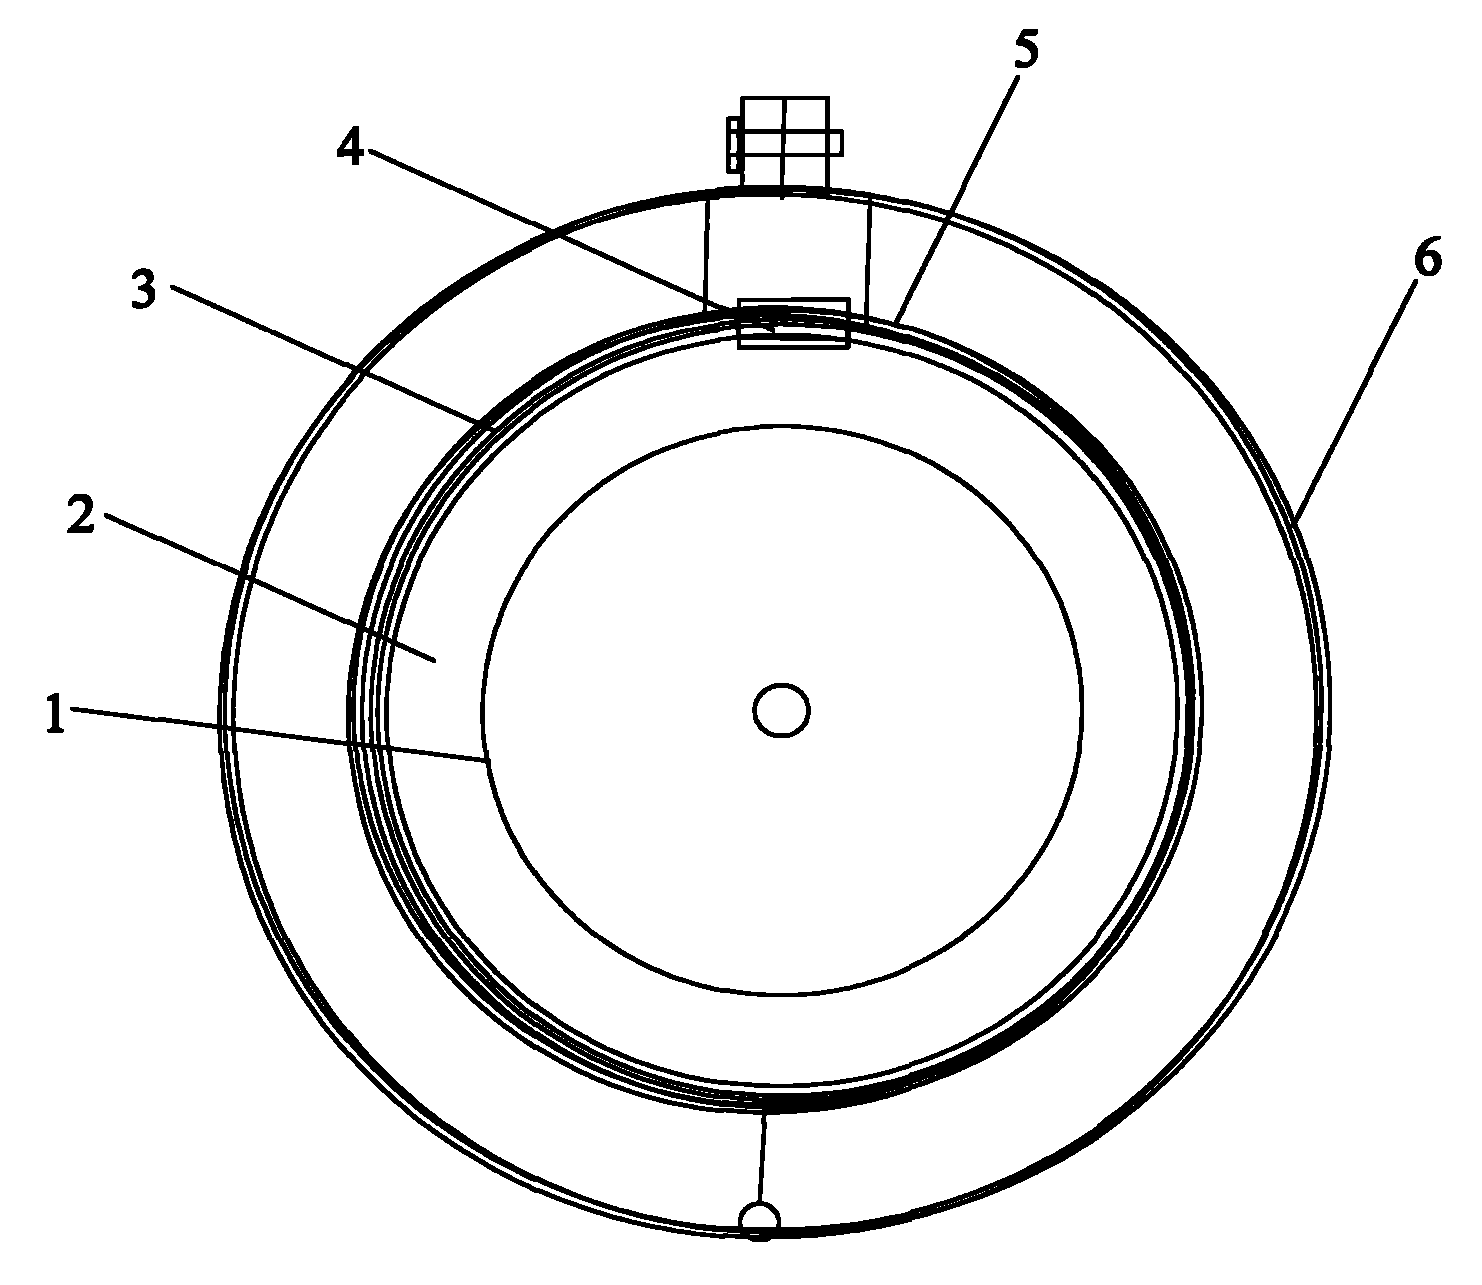 Electromagnetic induction heating device